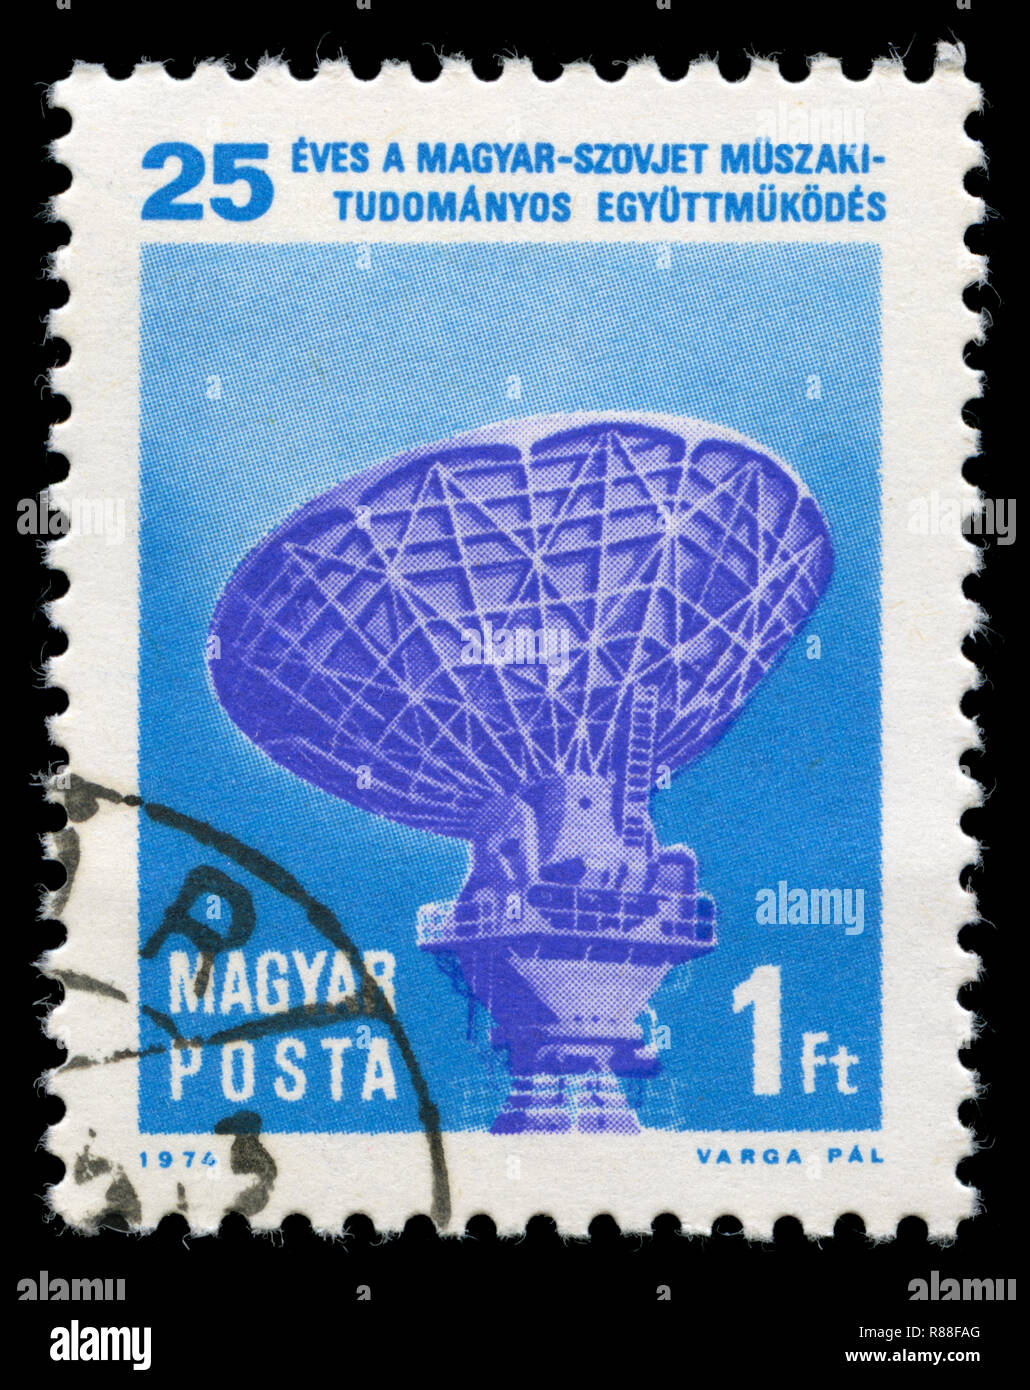 Postage stamp from Hungary in the Anniversary series issued in 1974 Stock Photo